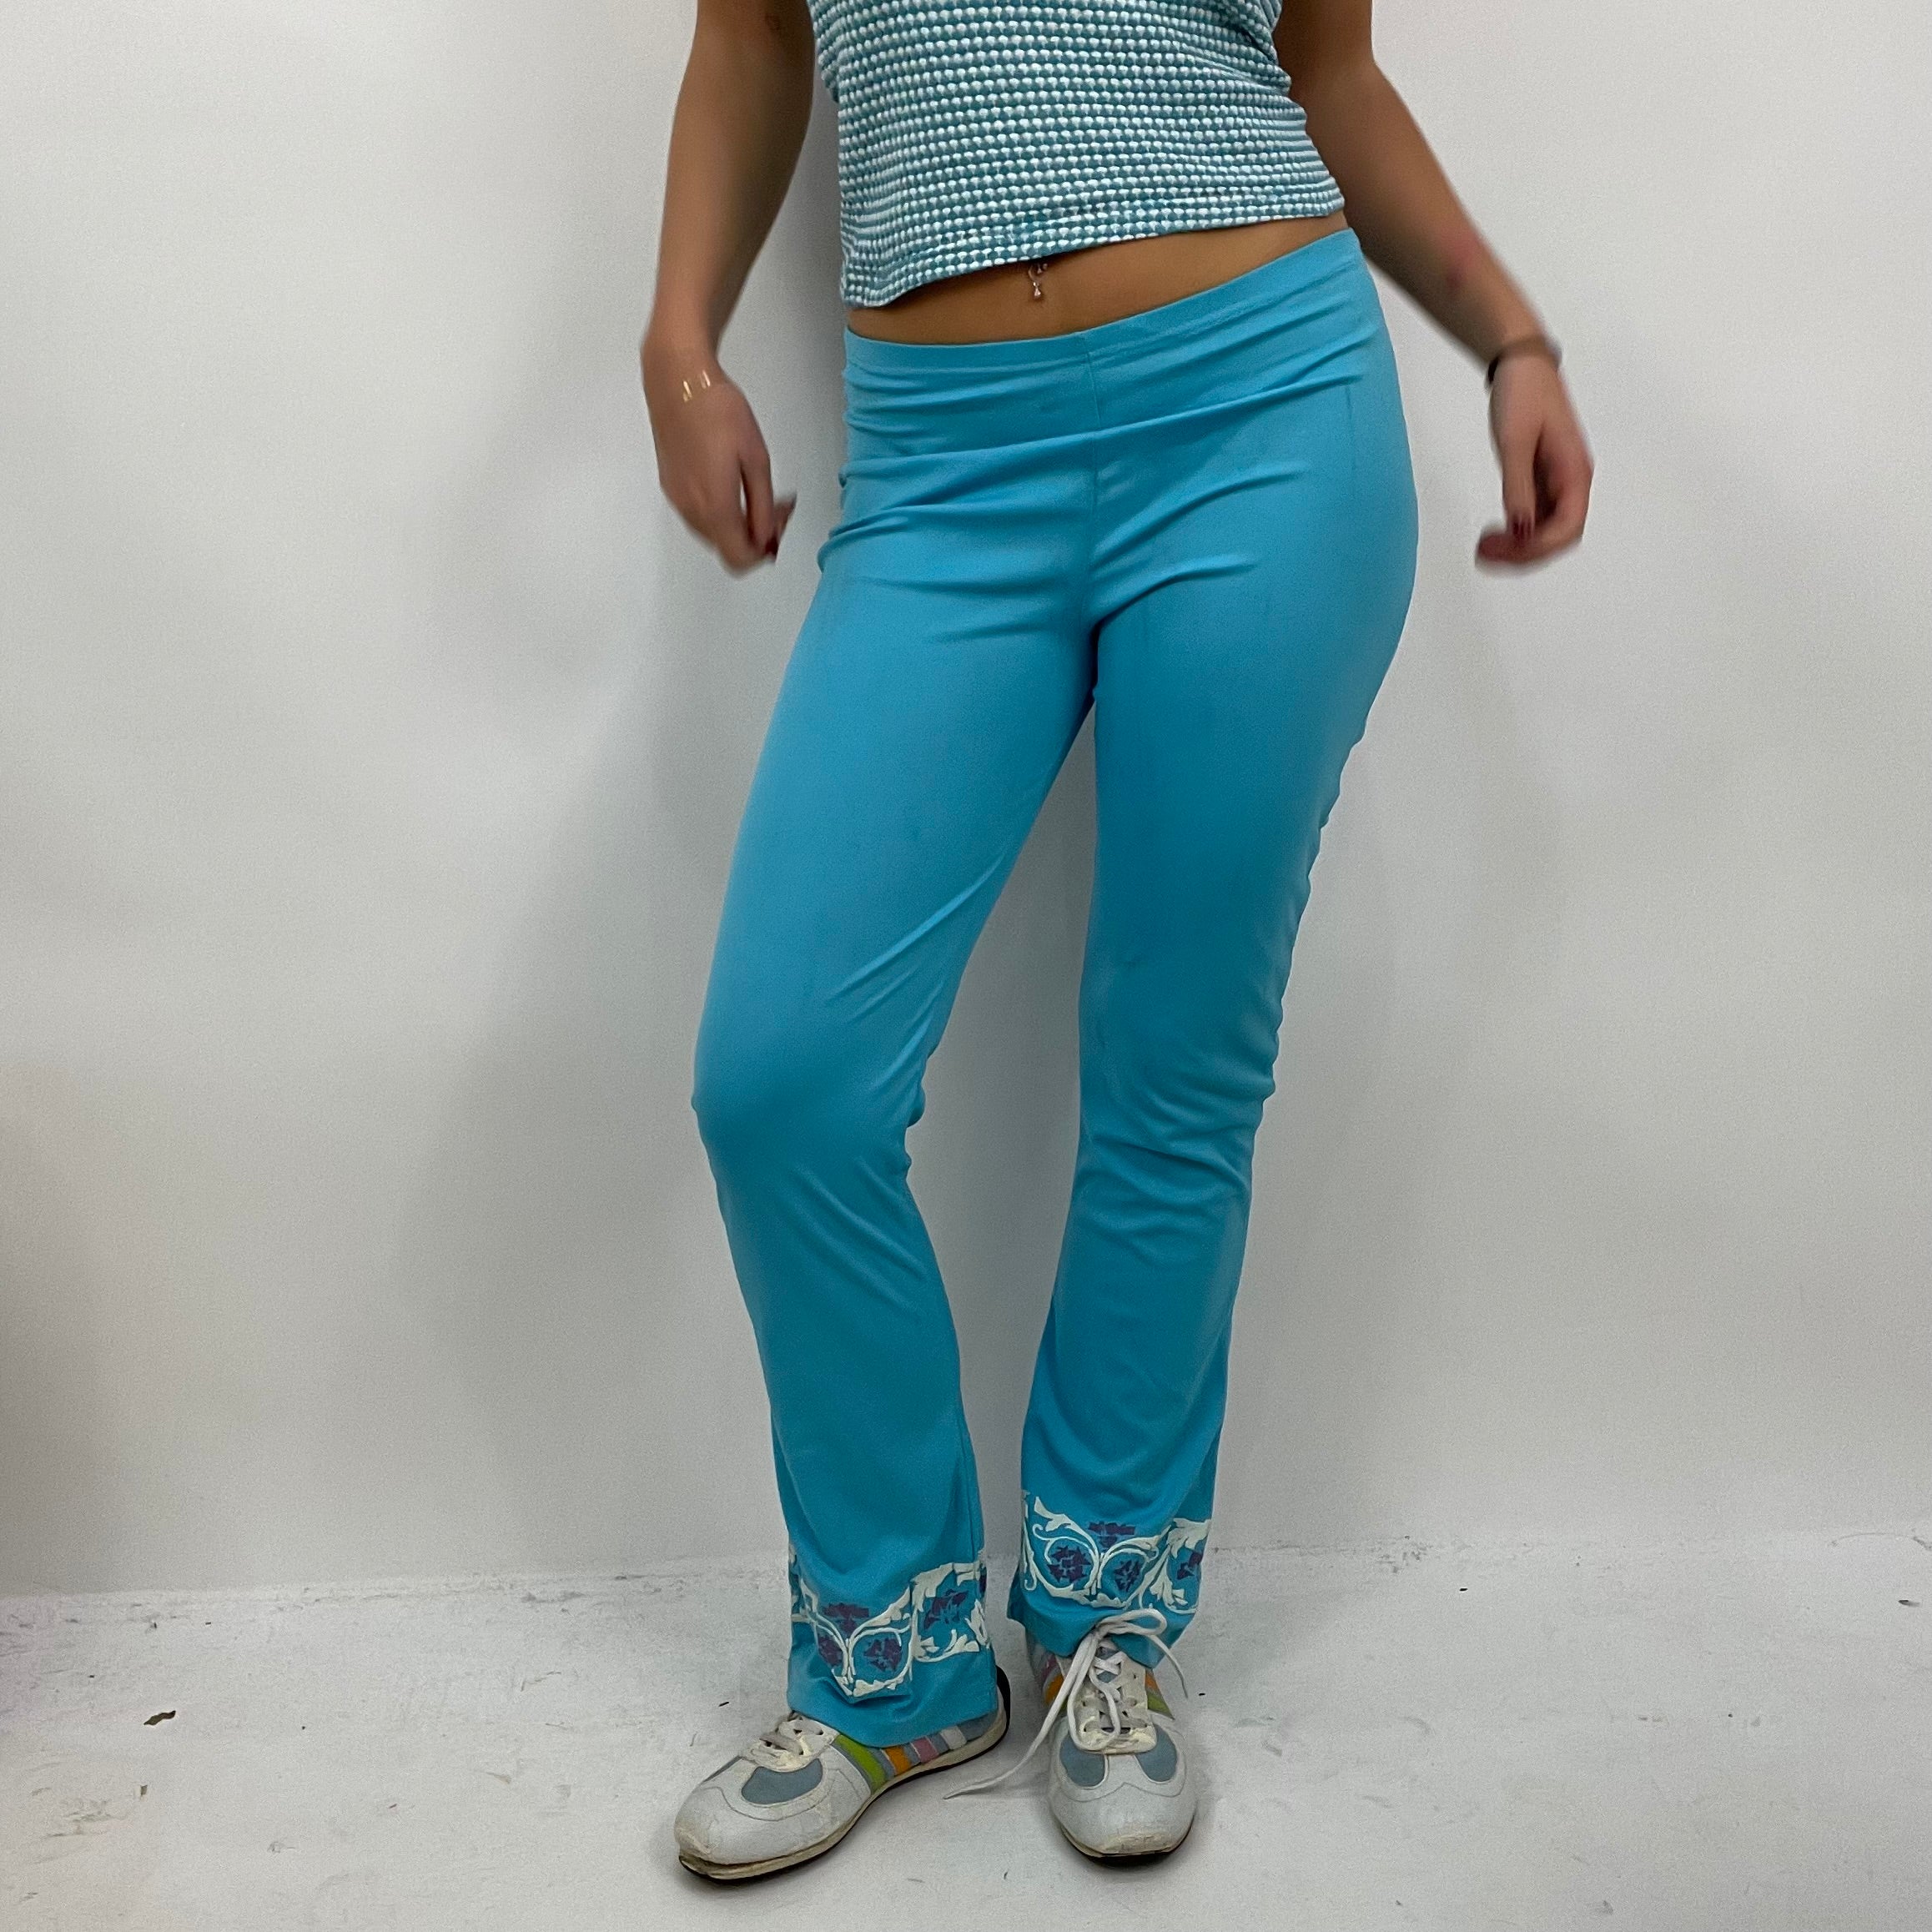 CHALET GIRL DROP  small blue patterned yoga pants – remass